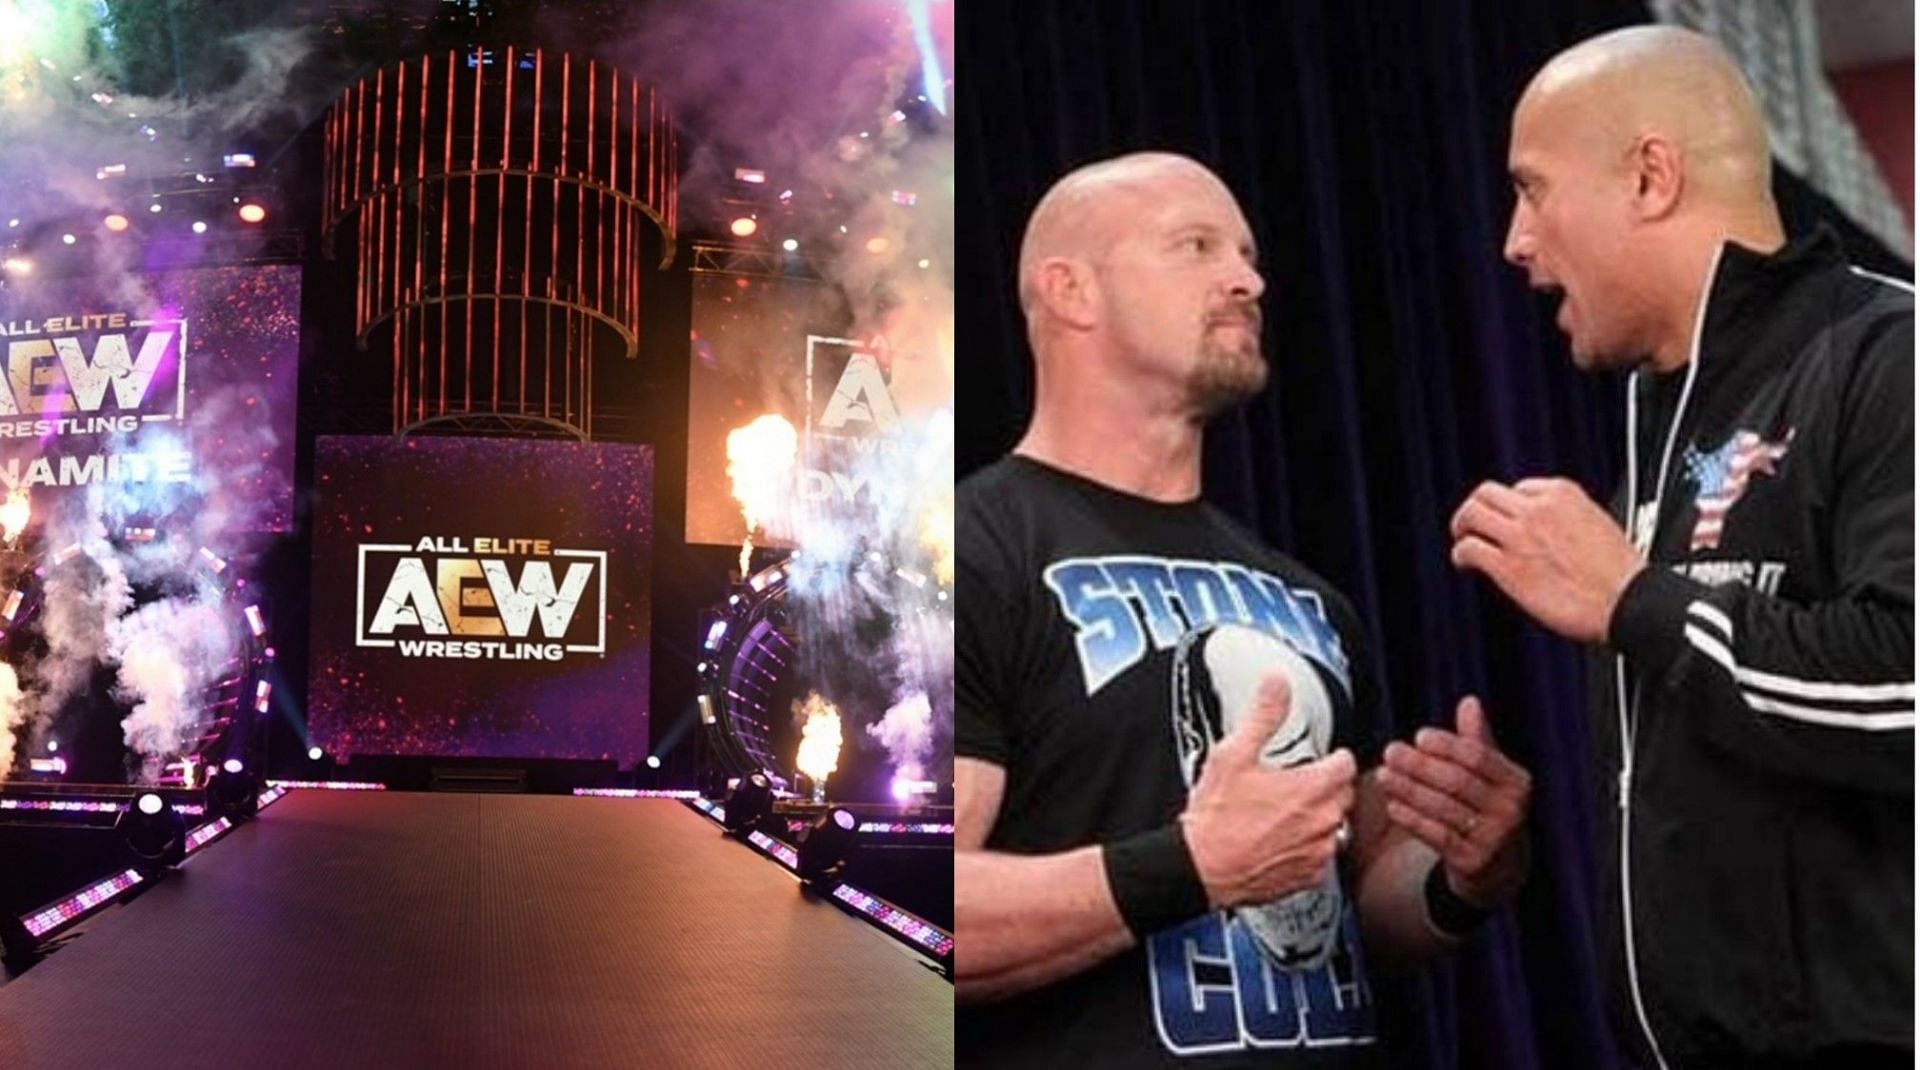 The Rock and Stone Cold Steve Austin had one of the most iconic rivalries in history